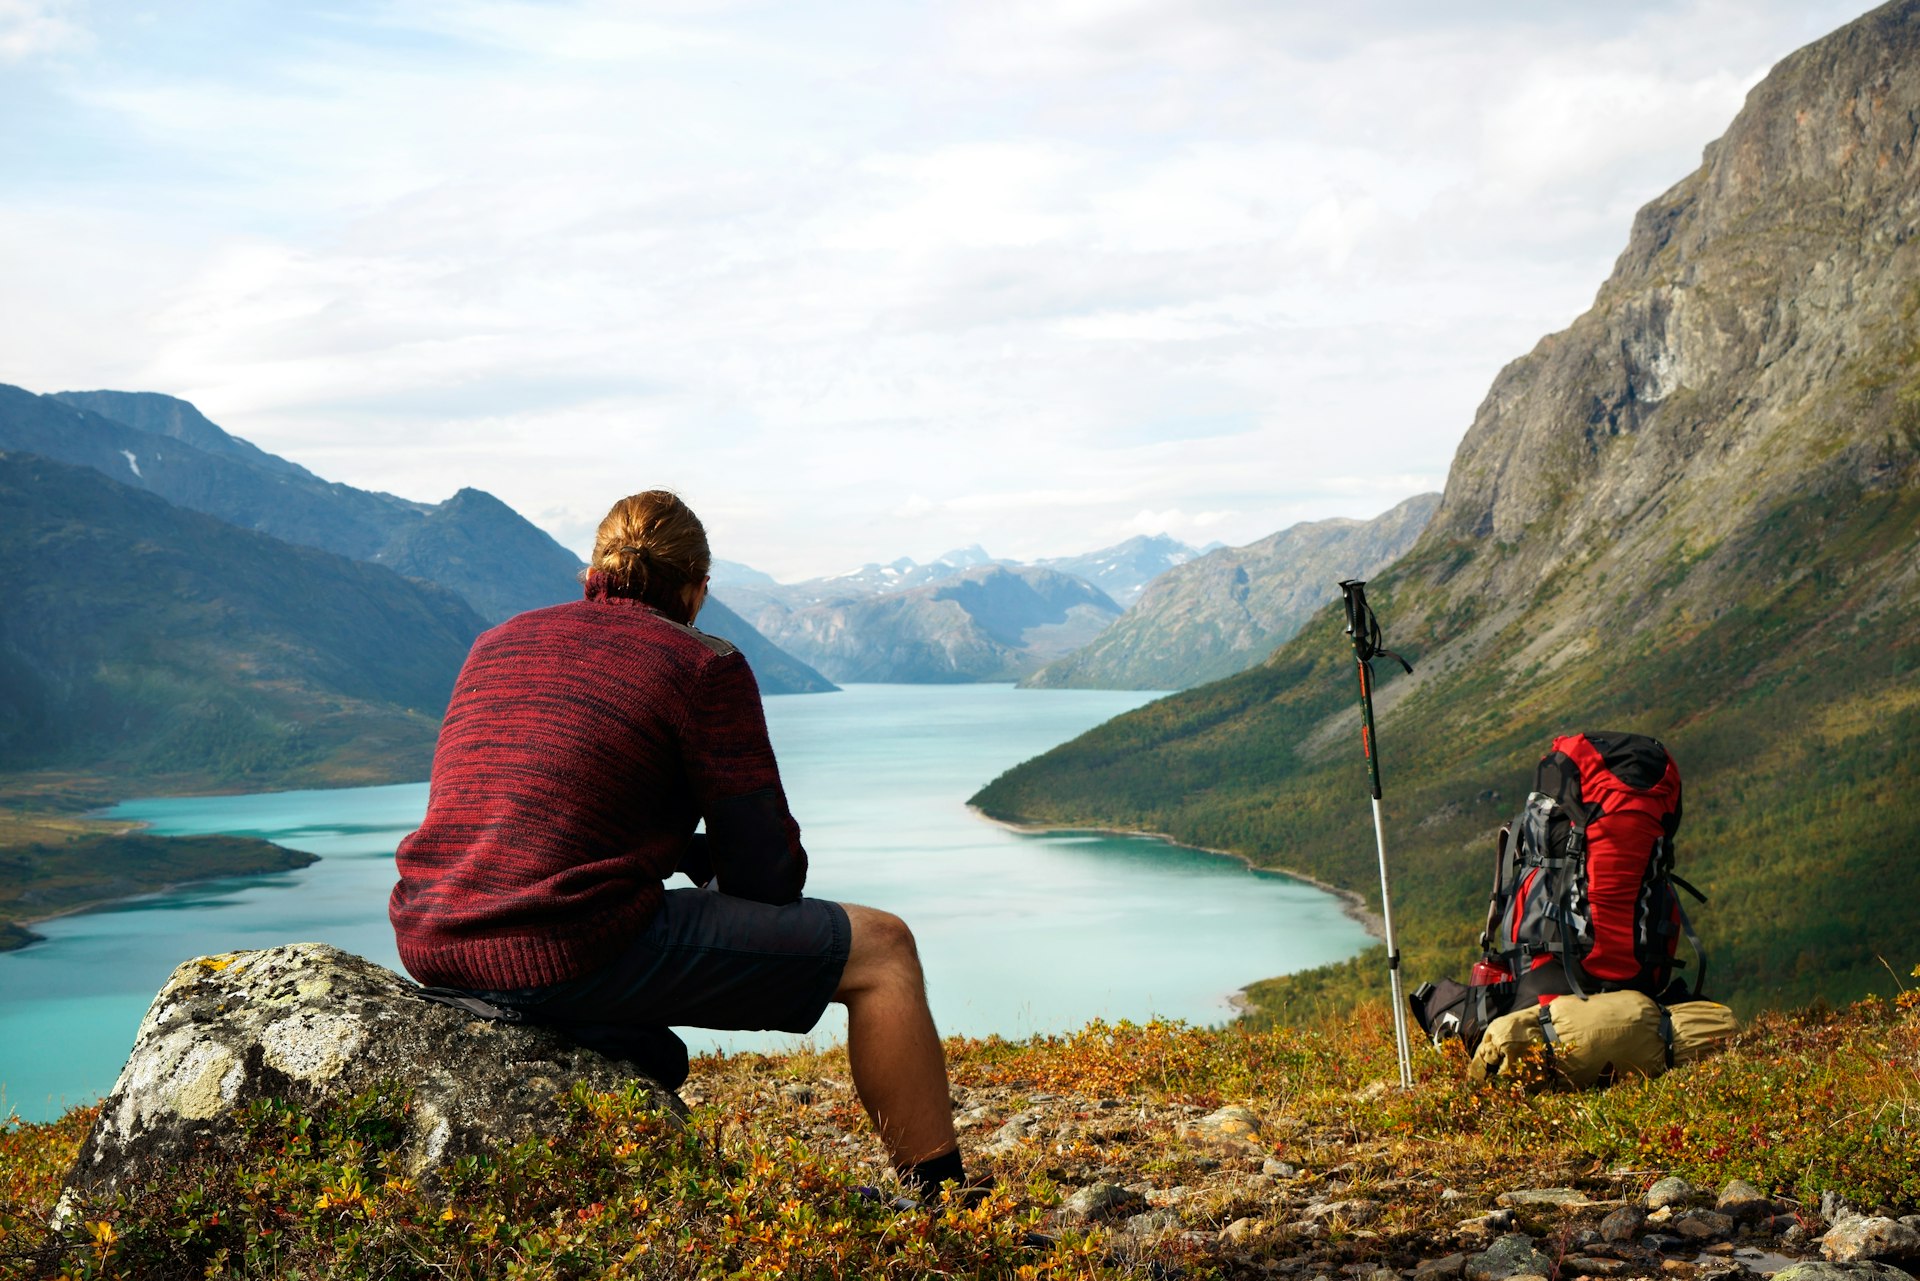 A hiker sits and pauses to look out over a stunning lake view